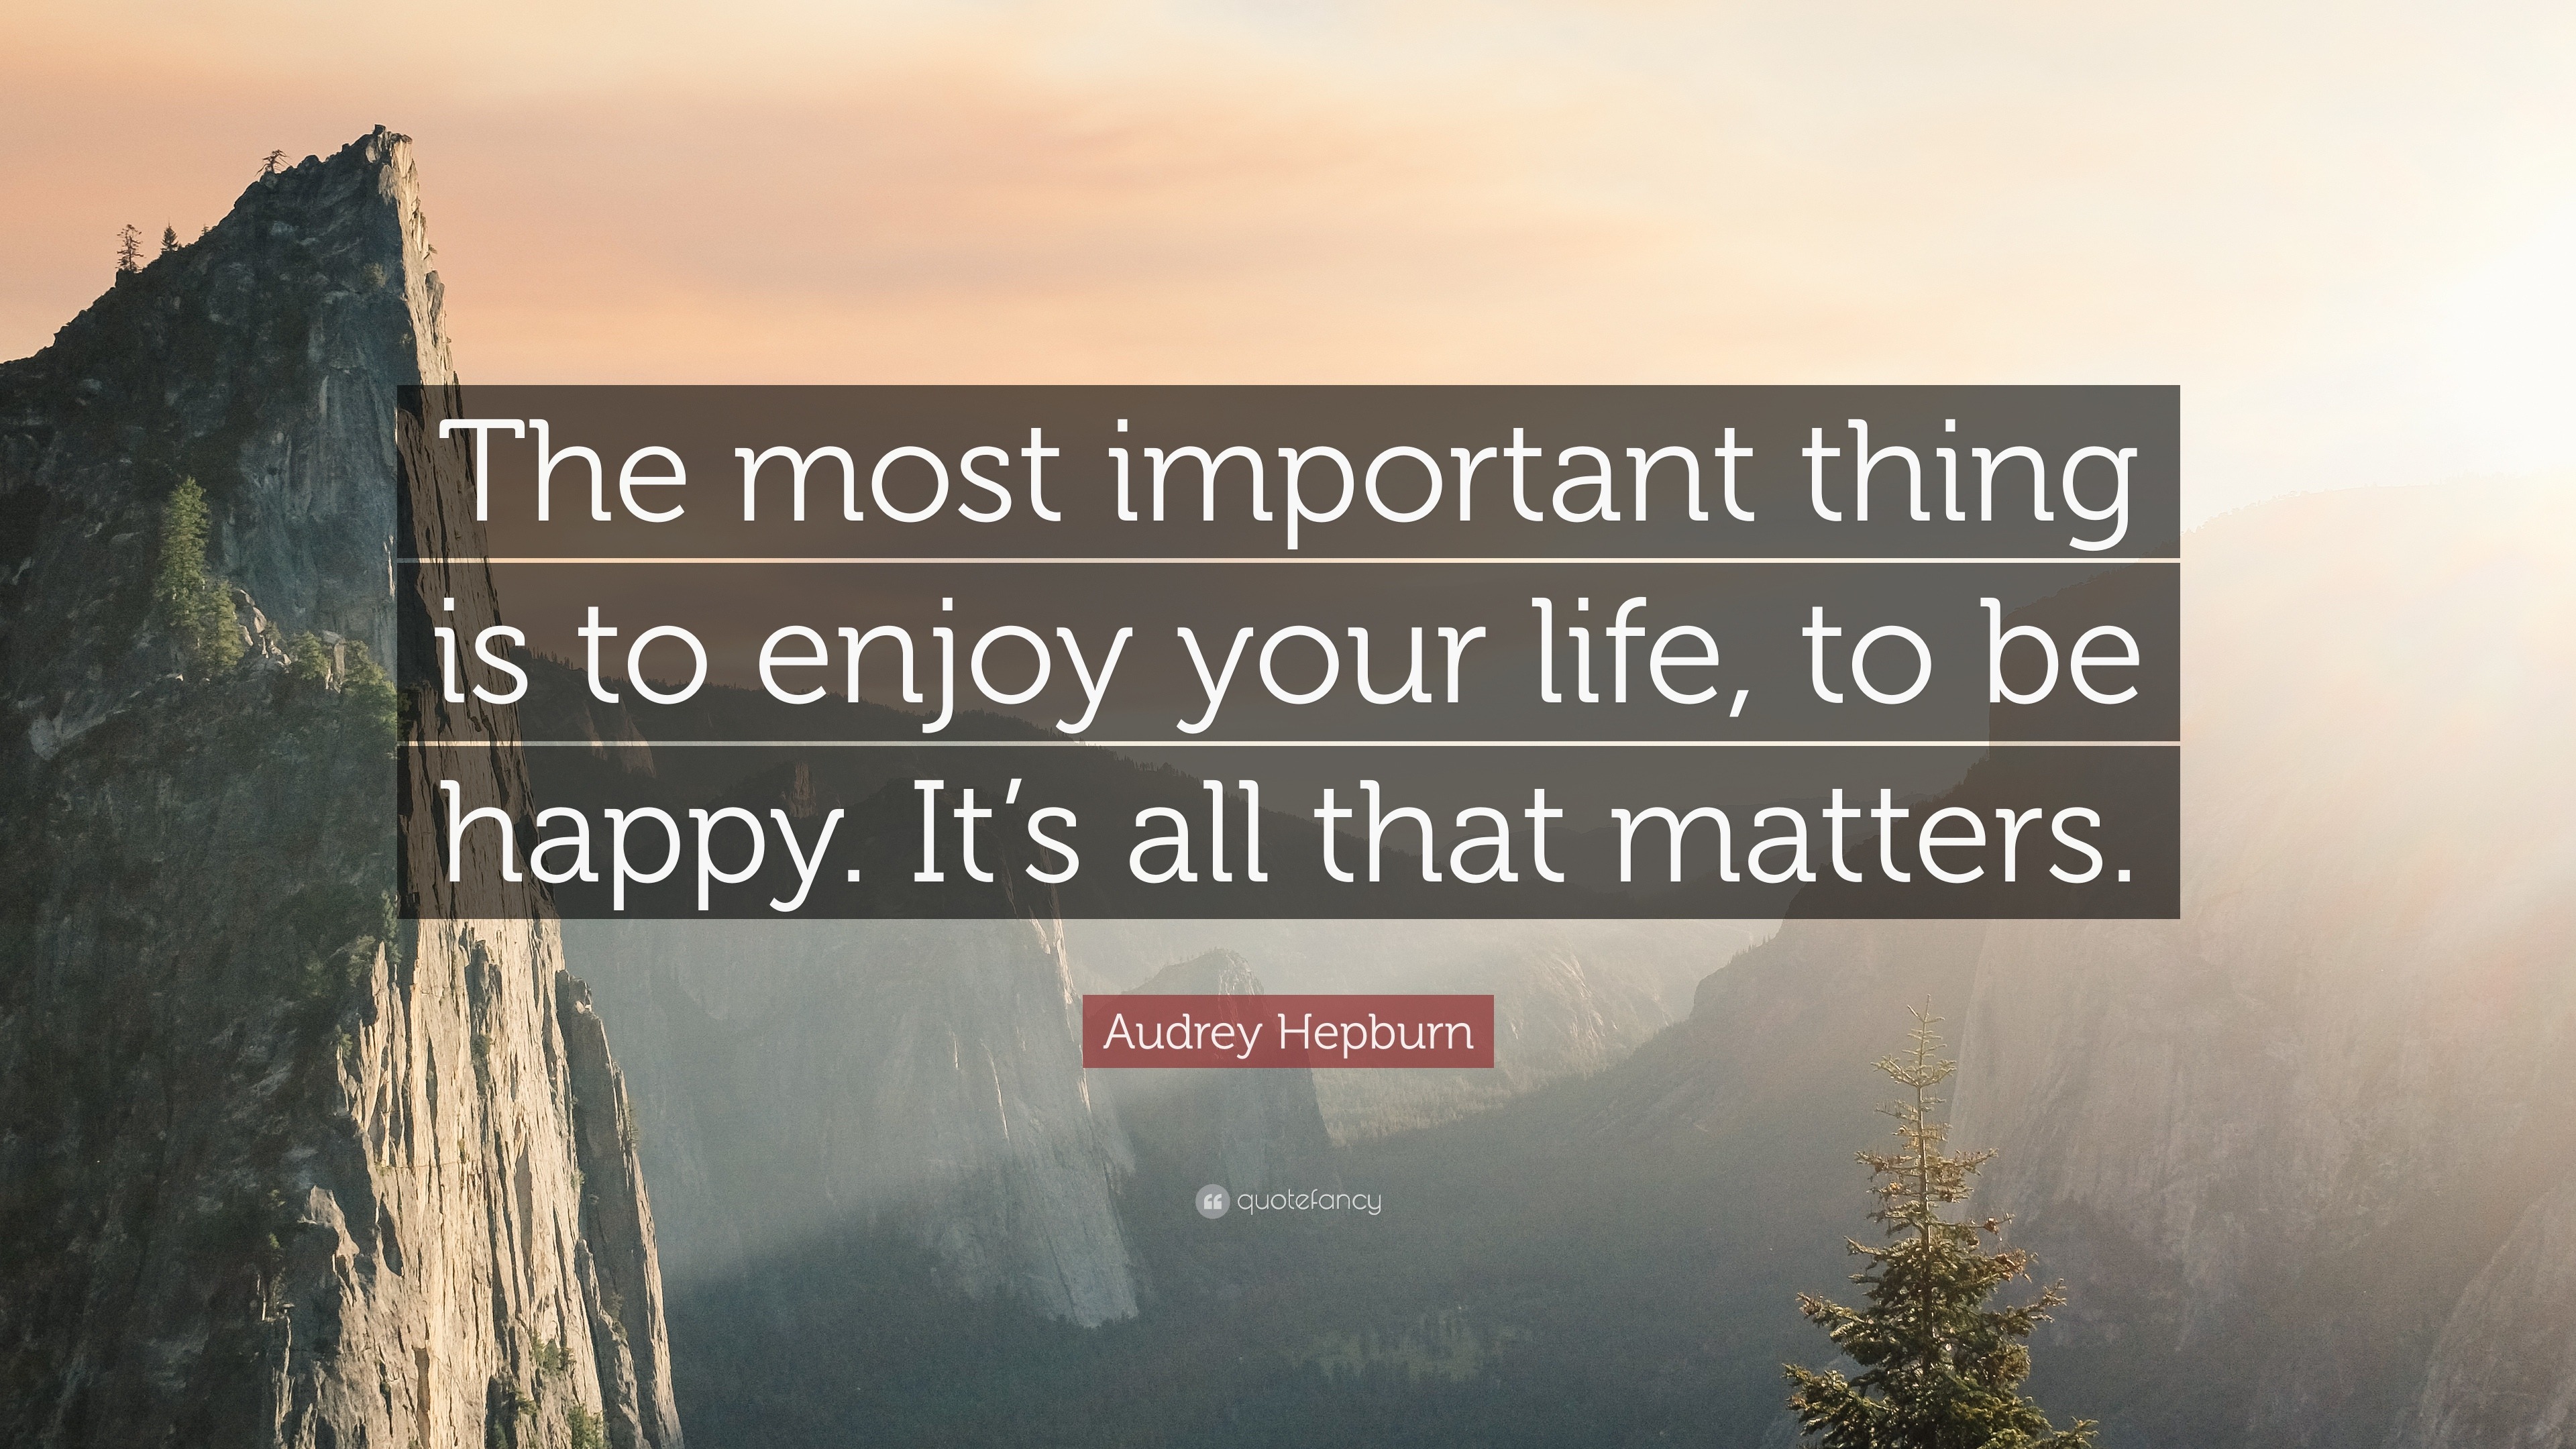 Audrey hepburn quote the most important thing is to enjoy your life to